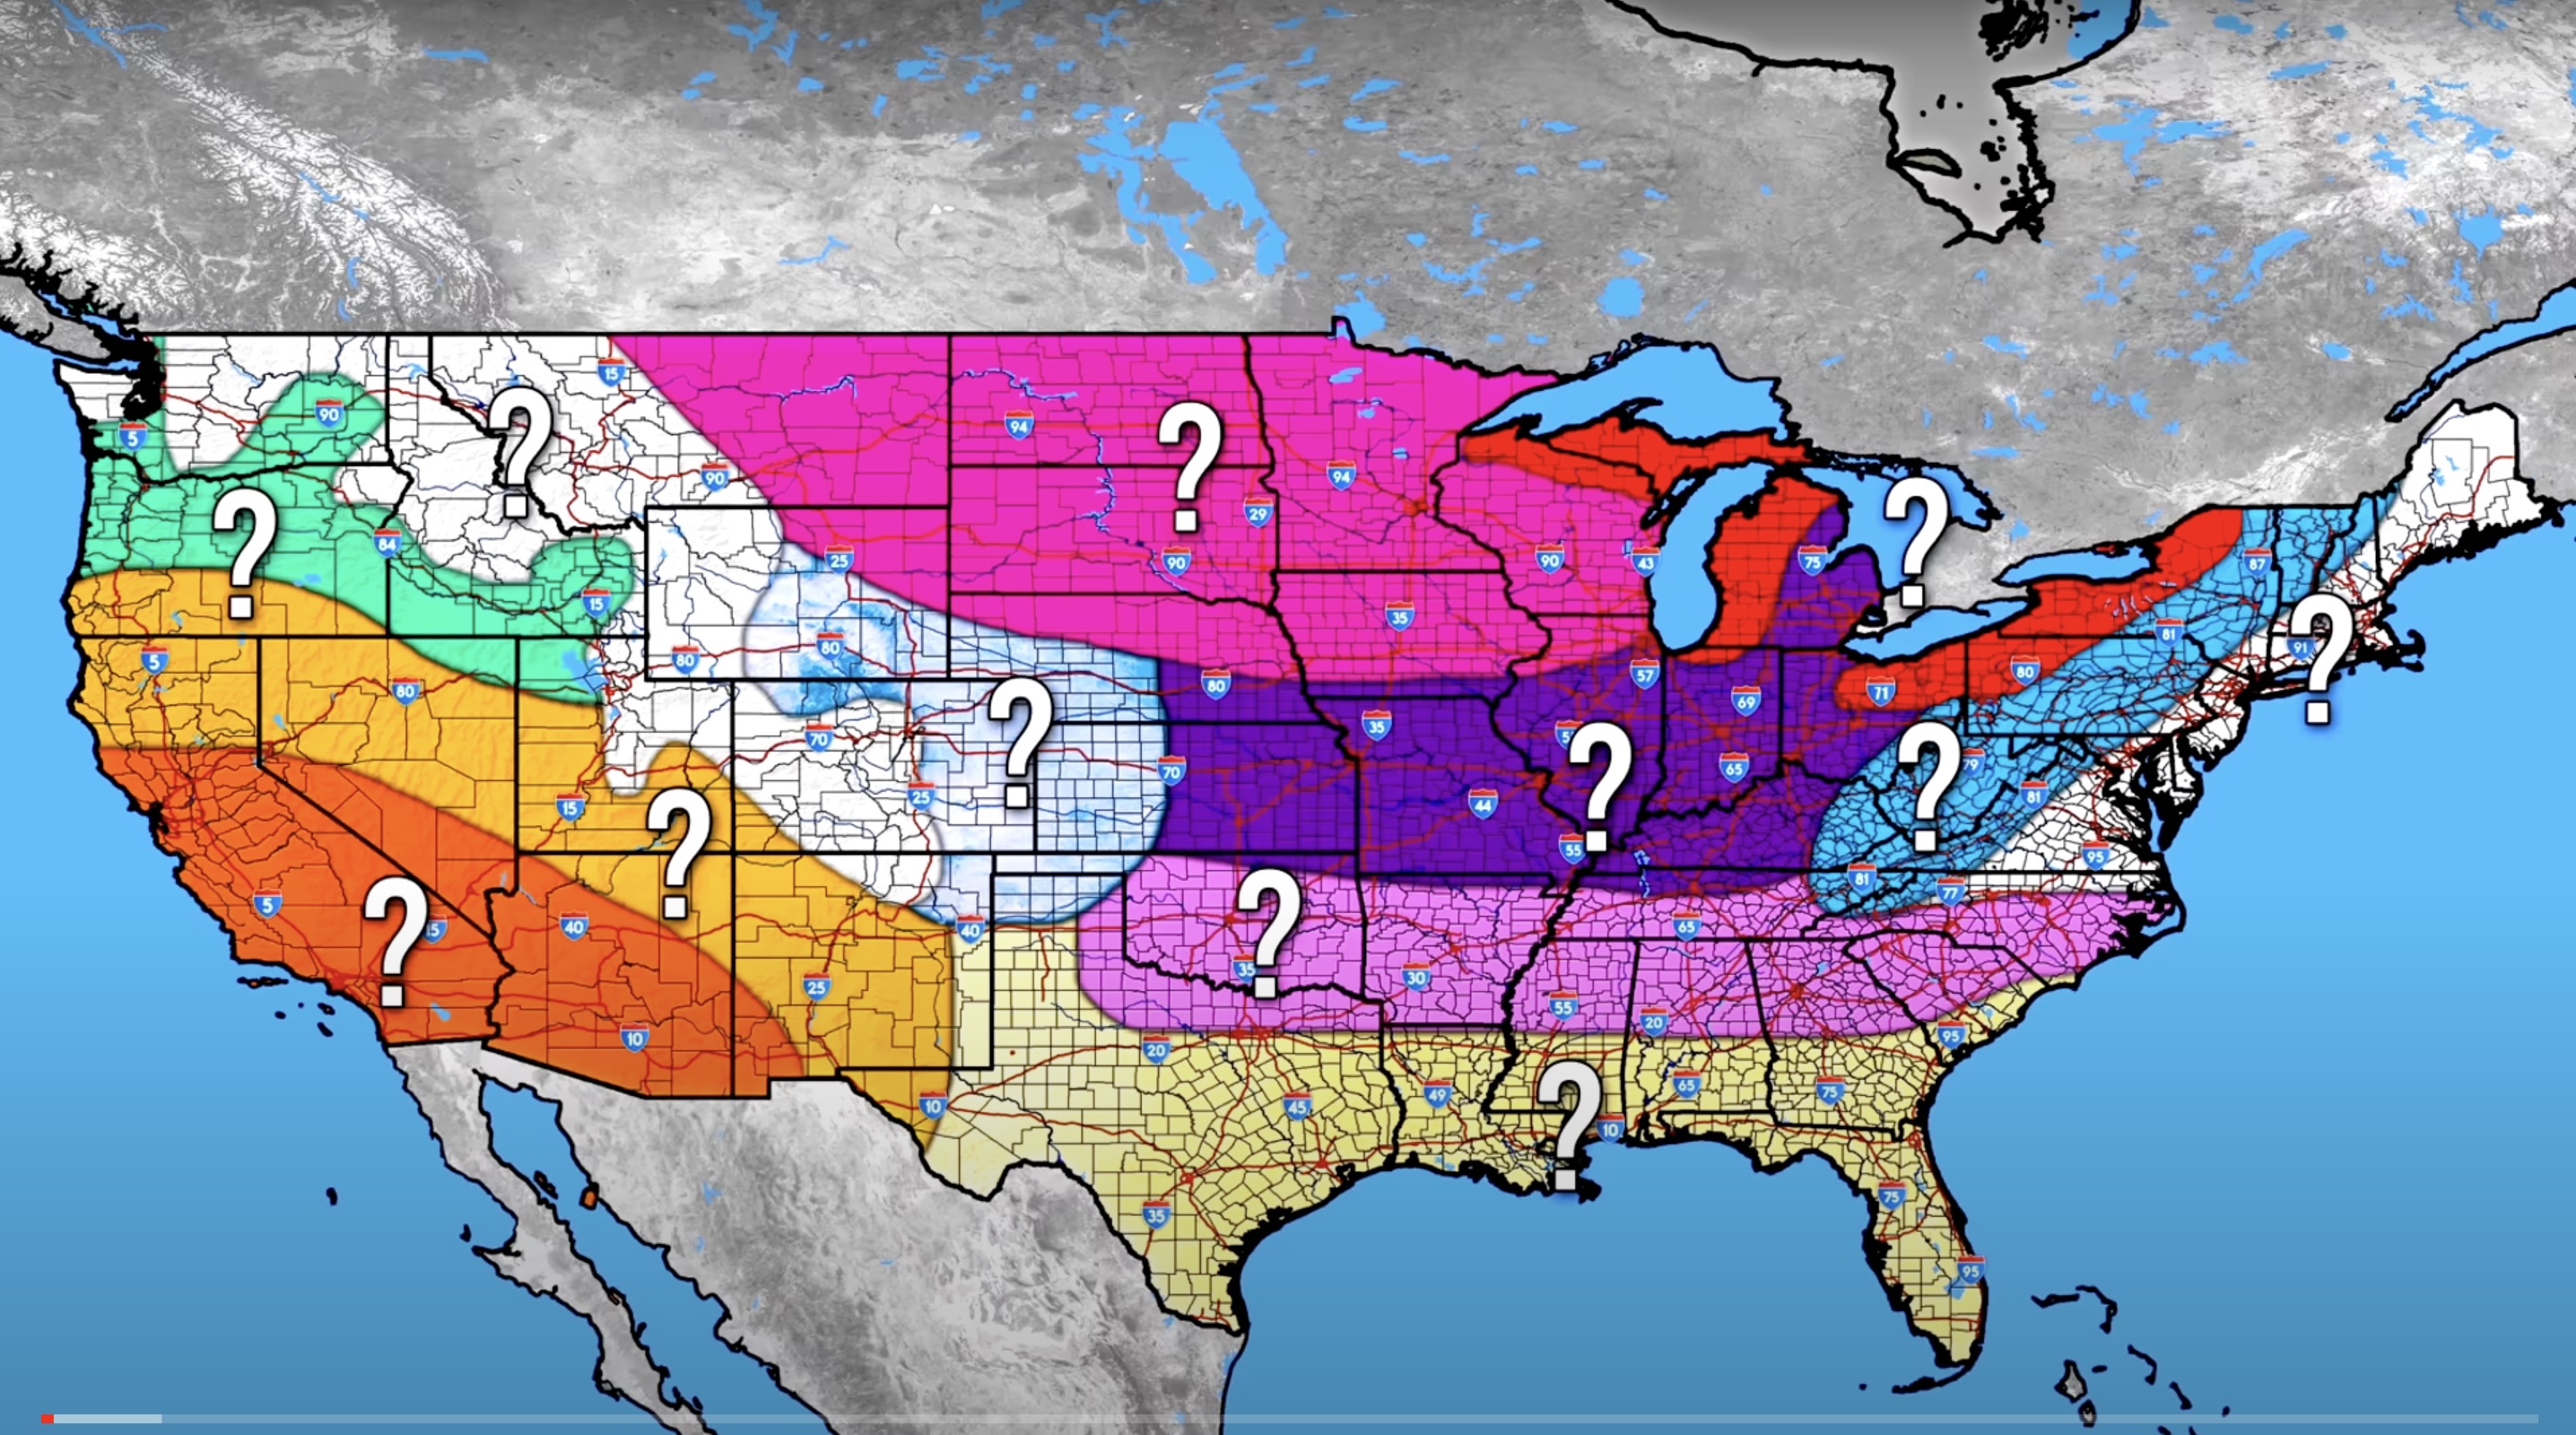 Winter Weather Forecast / Prediction for 2022 - 2023 | From Direct Weather